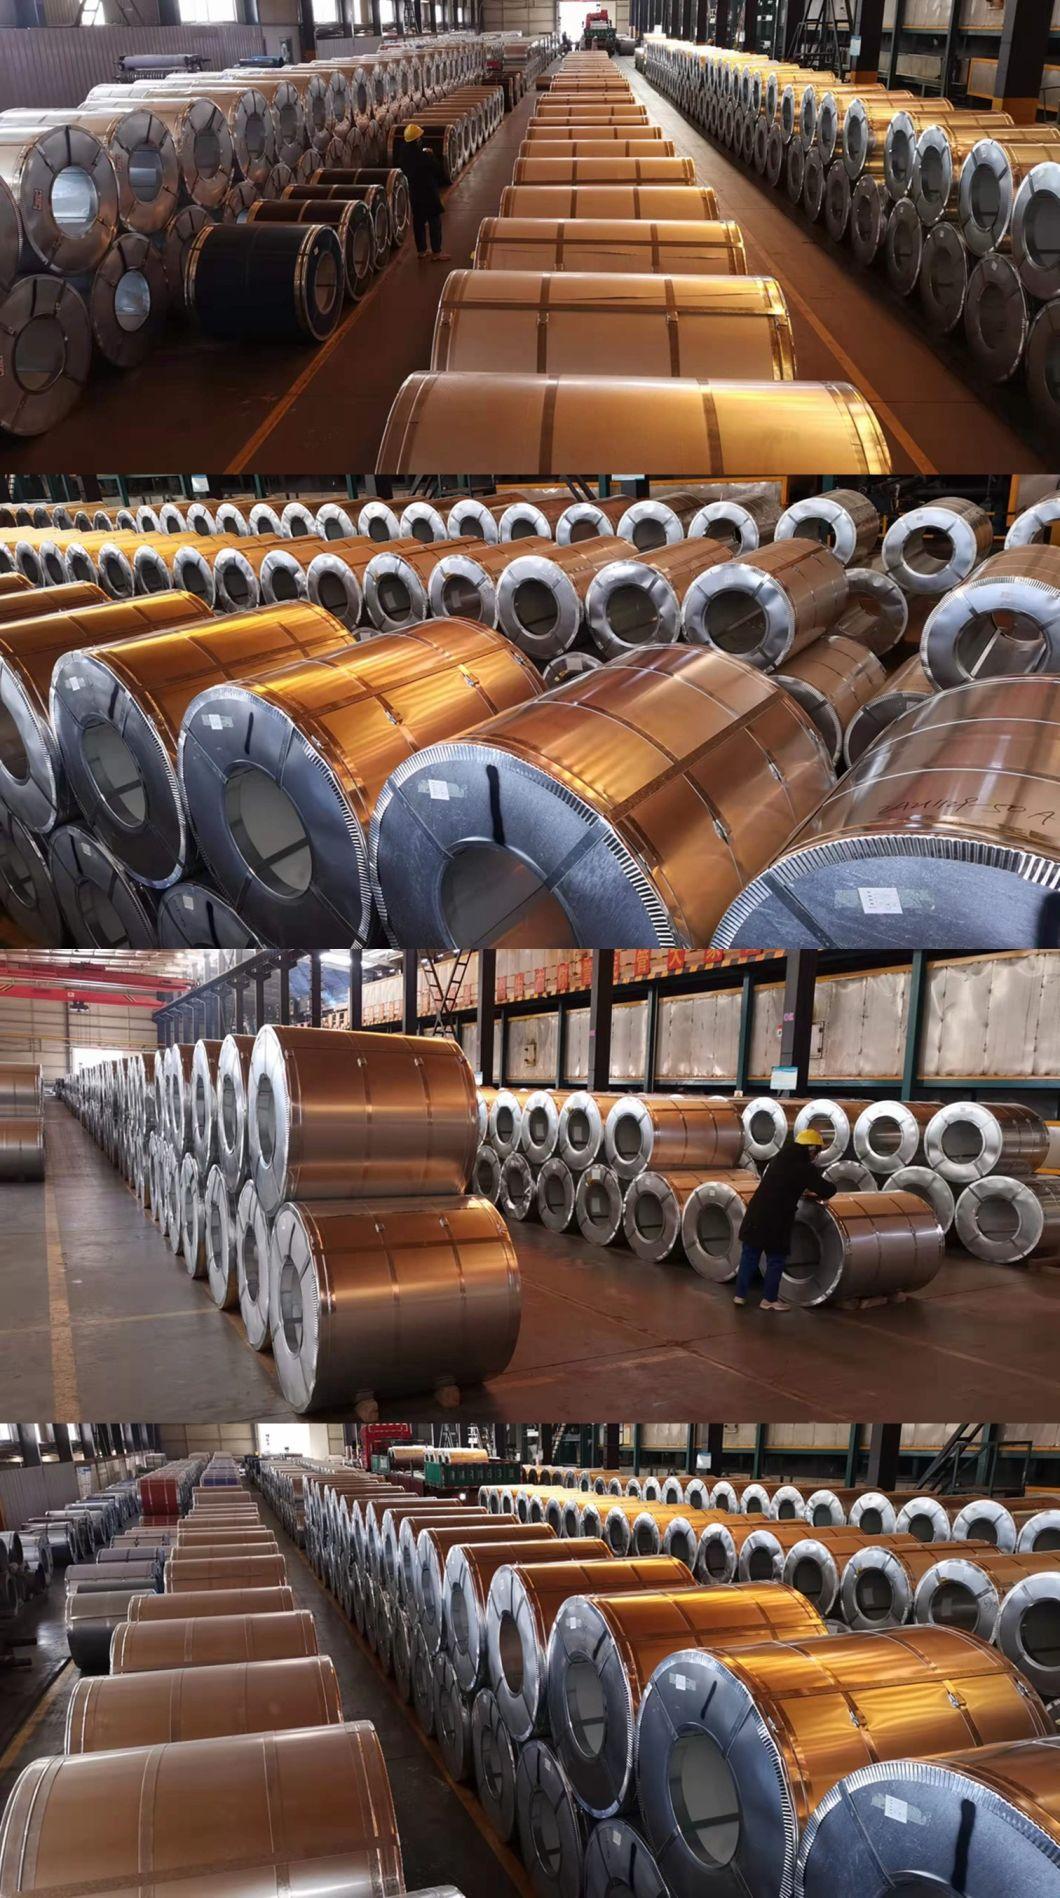 AISI Dx52D 0.12-2.0mm*600-1250mm Building Material Per Ton Price Steel Coil in China Galvanized